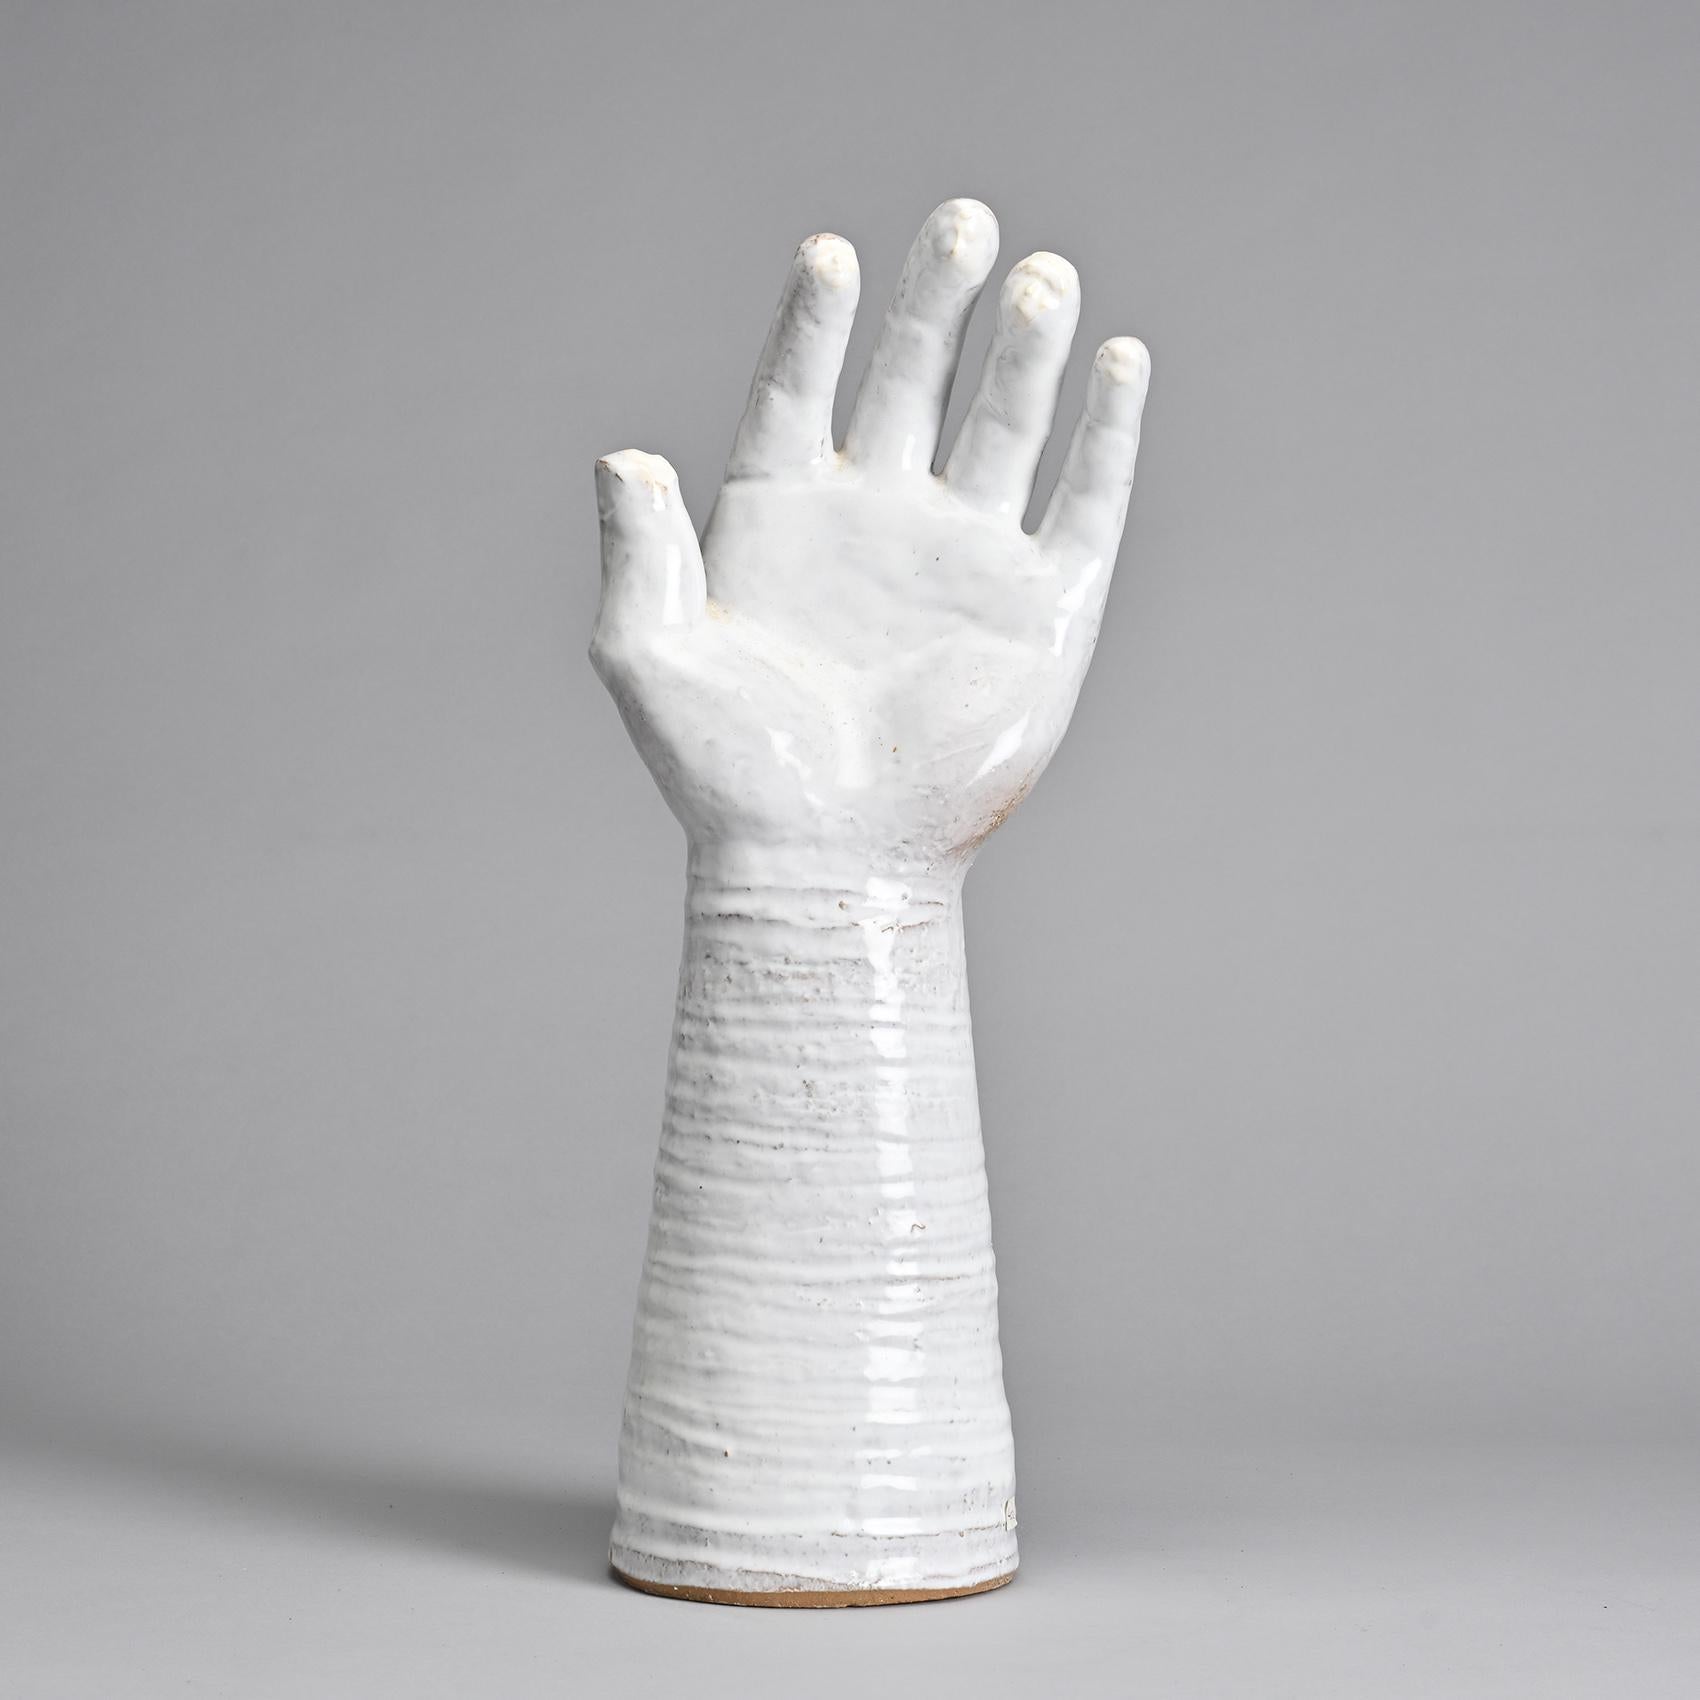 
Unique Piece

Hand with Faces

Created by Robert and Jean Cloutier, twin brothers and French ceramicists, this sculpture depicts an outstretched hand subtly revealing faces at the fingertips. It is made of red clay with a glossy white